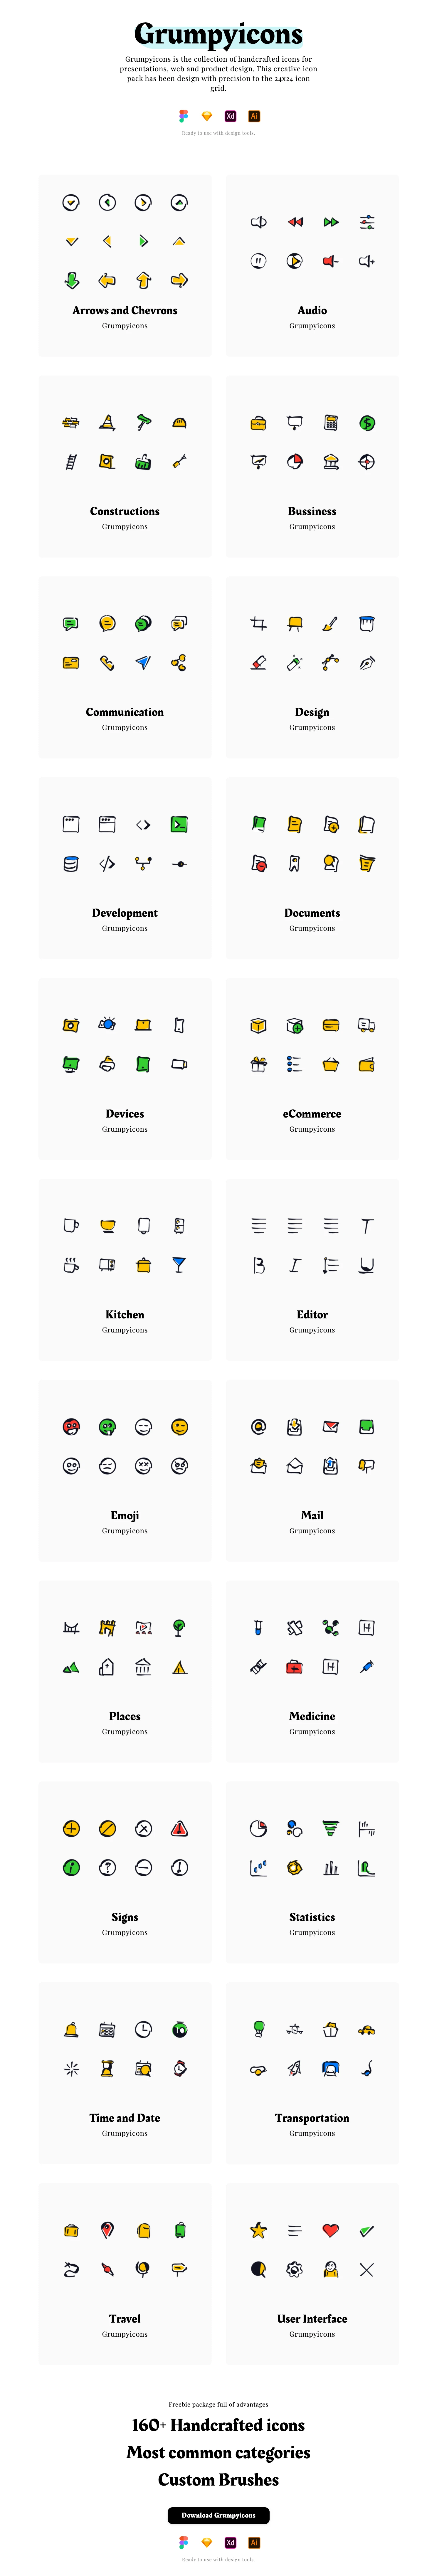 Grumpyicons Free Icons Pack